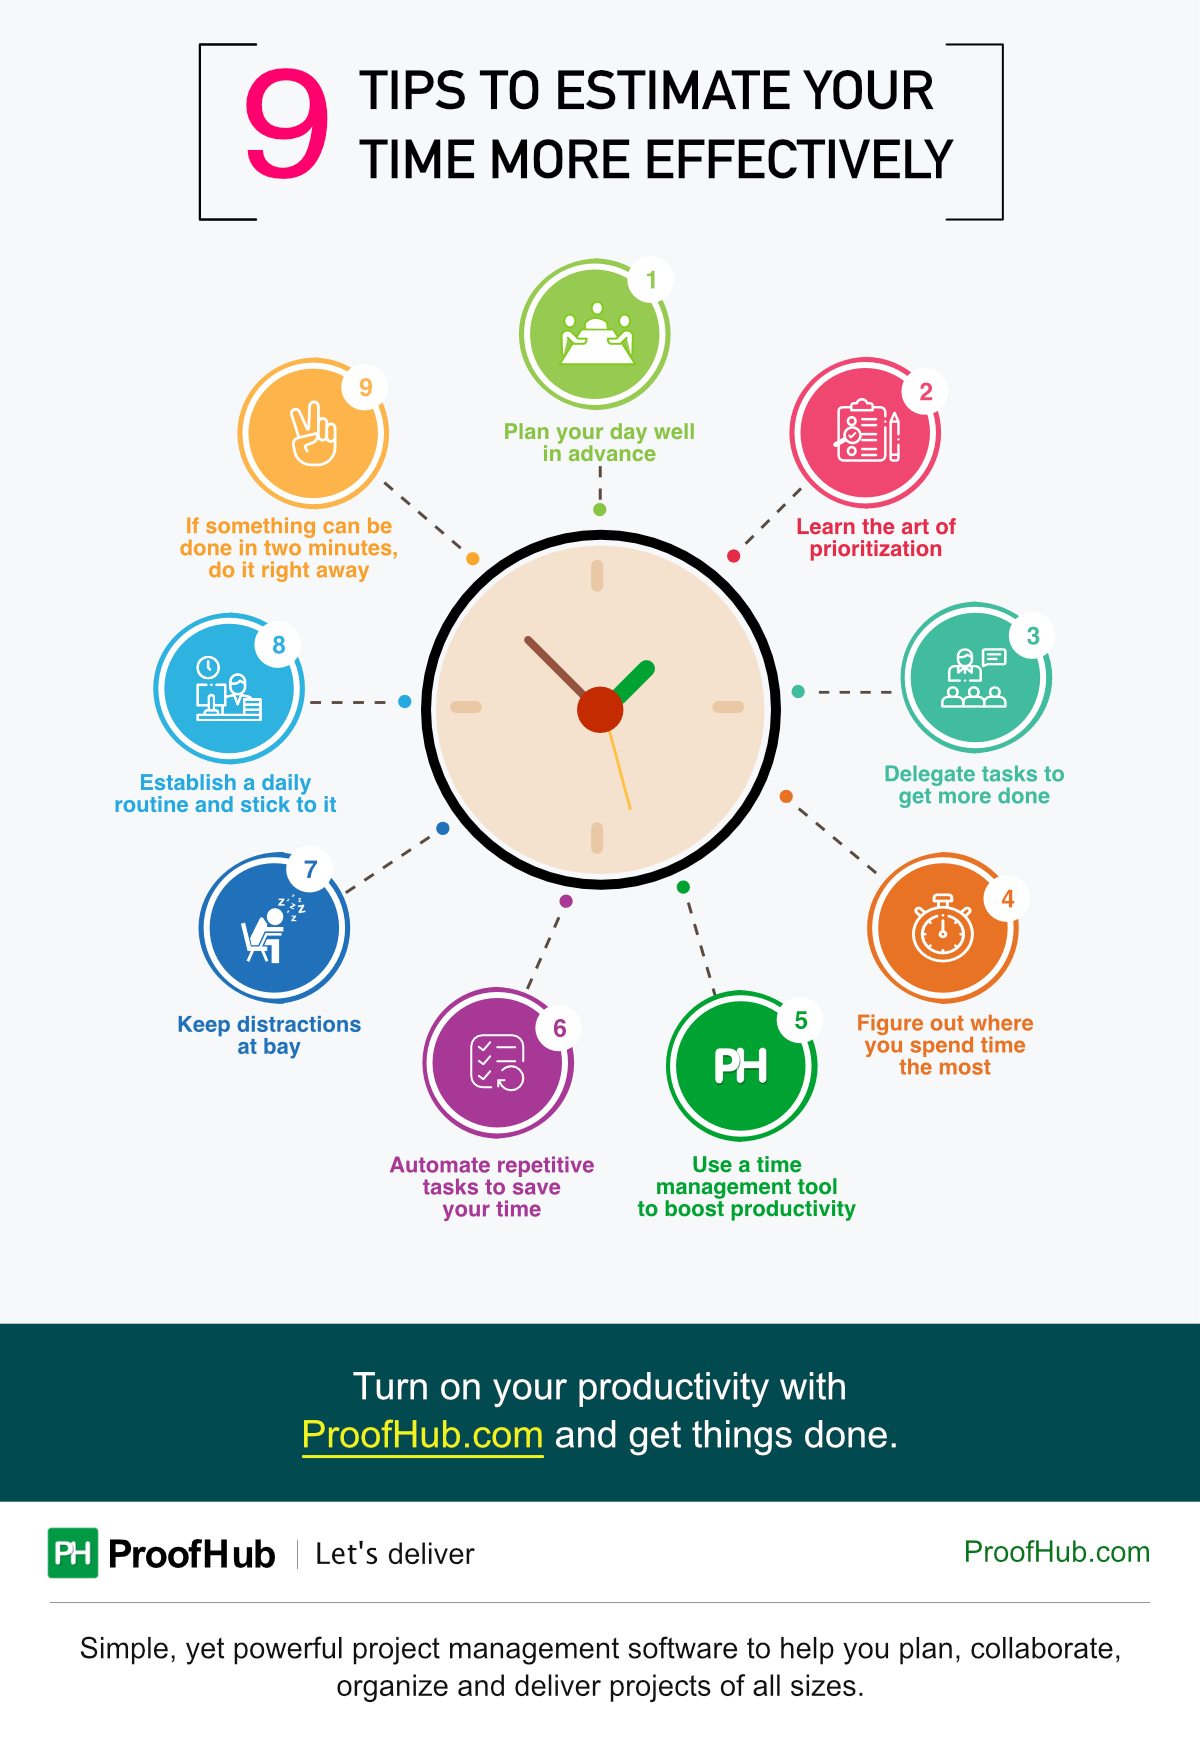 9 Tips to Estimate Your Time More Effectively